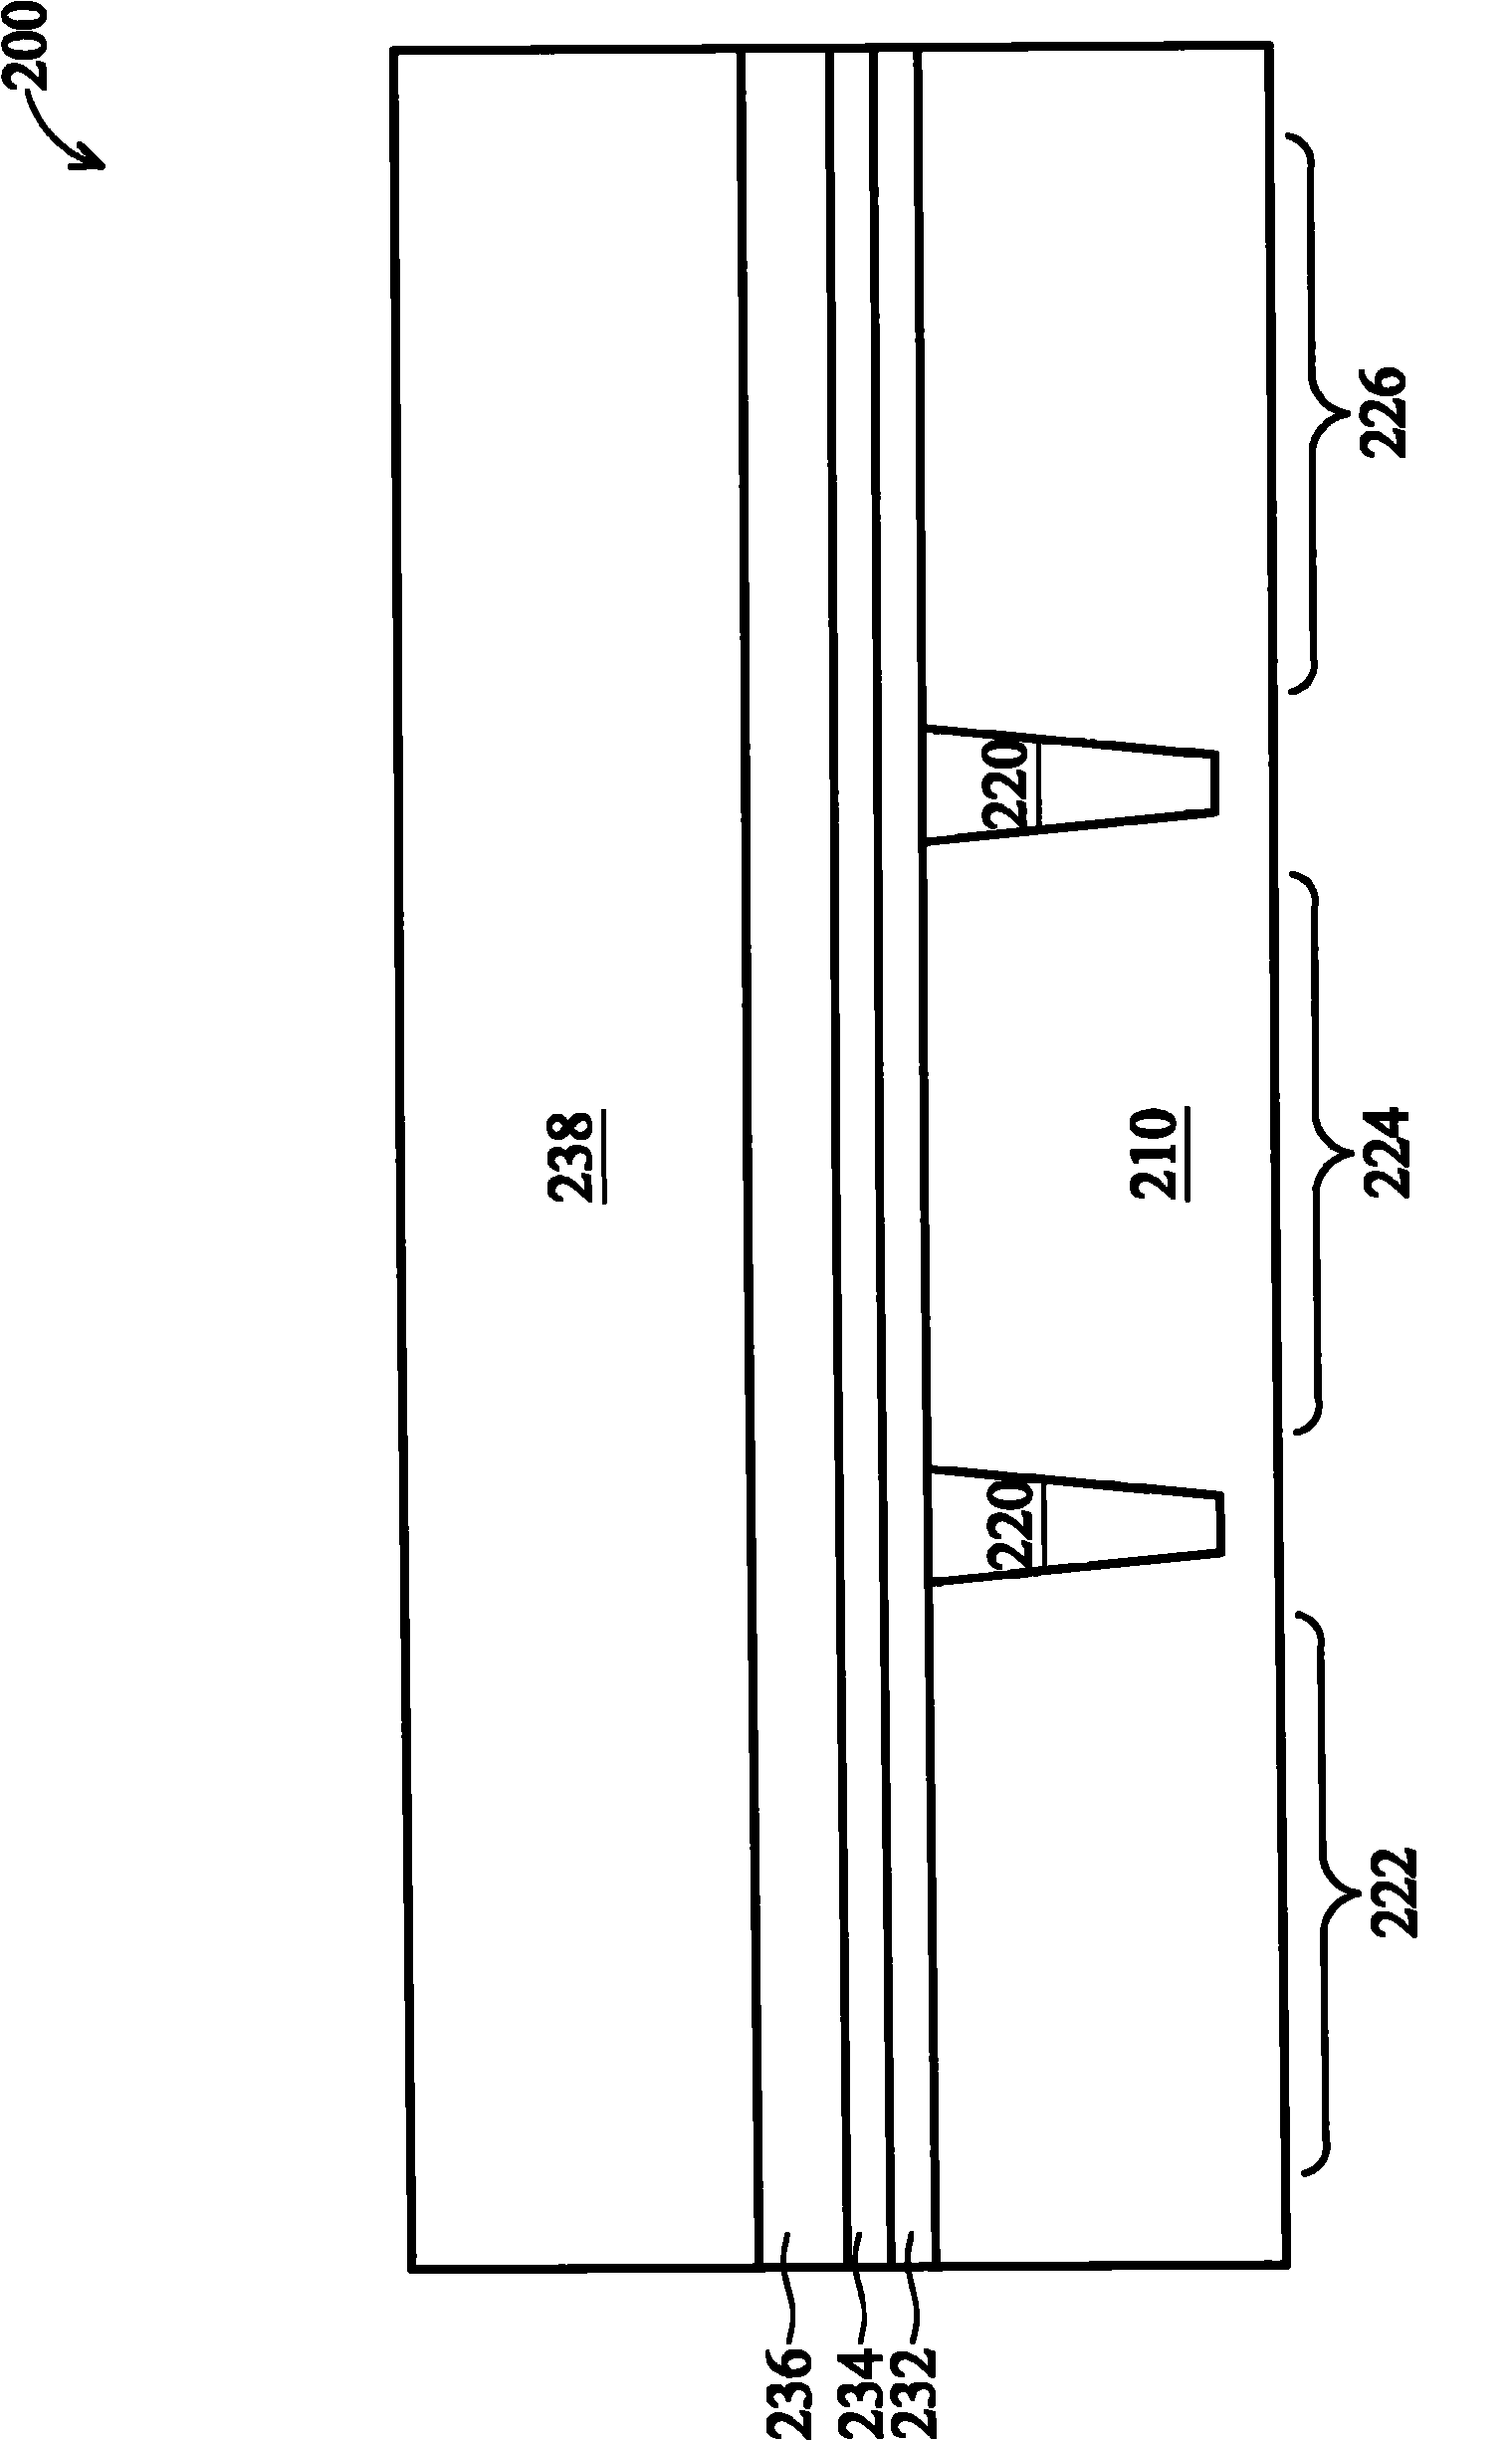 Method of manufacturing semiconductor element metal gate stack